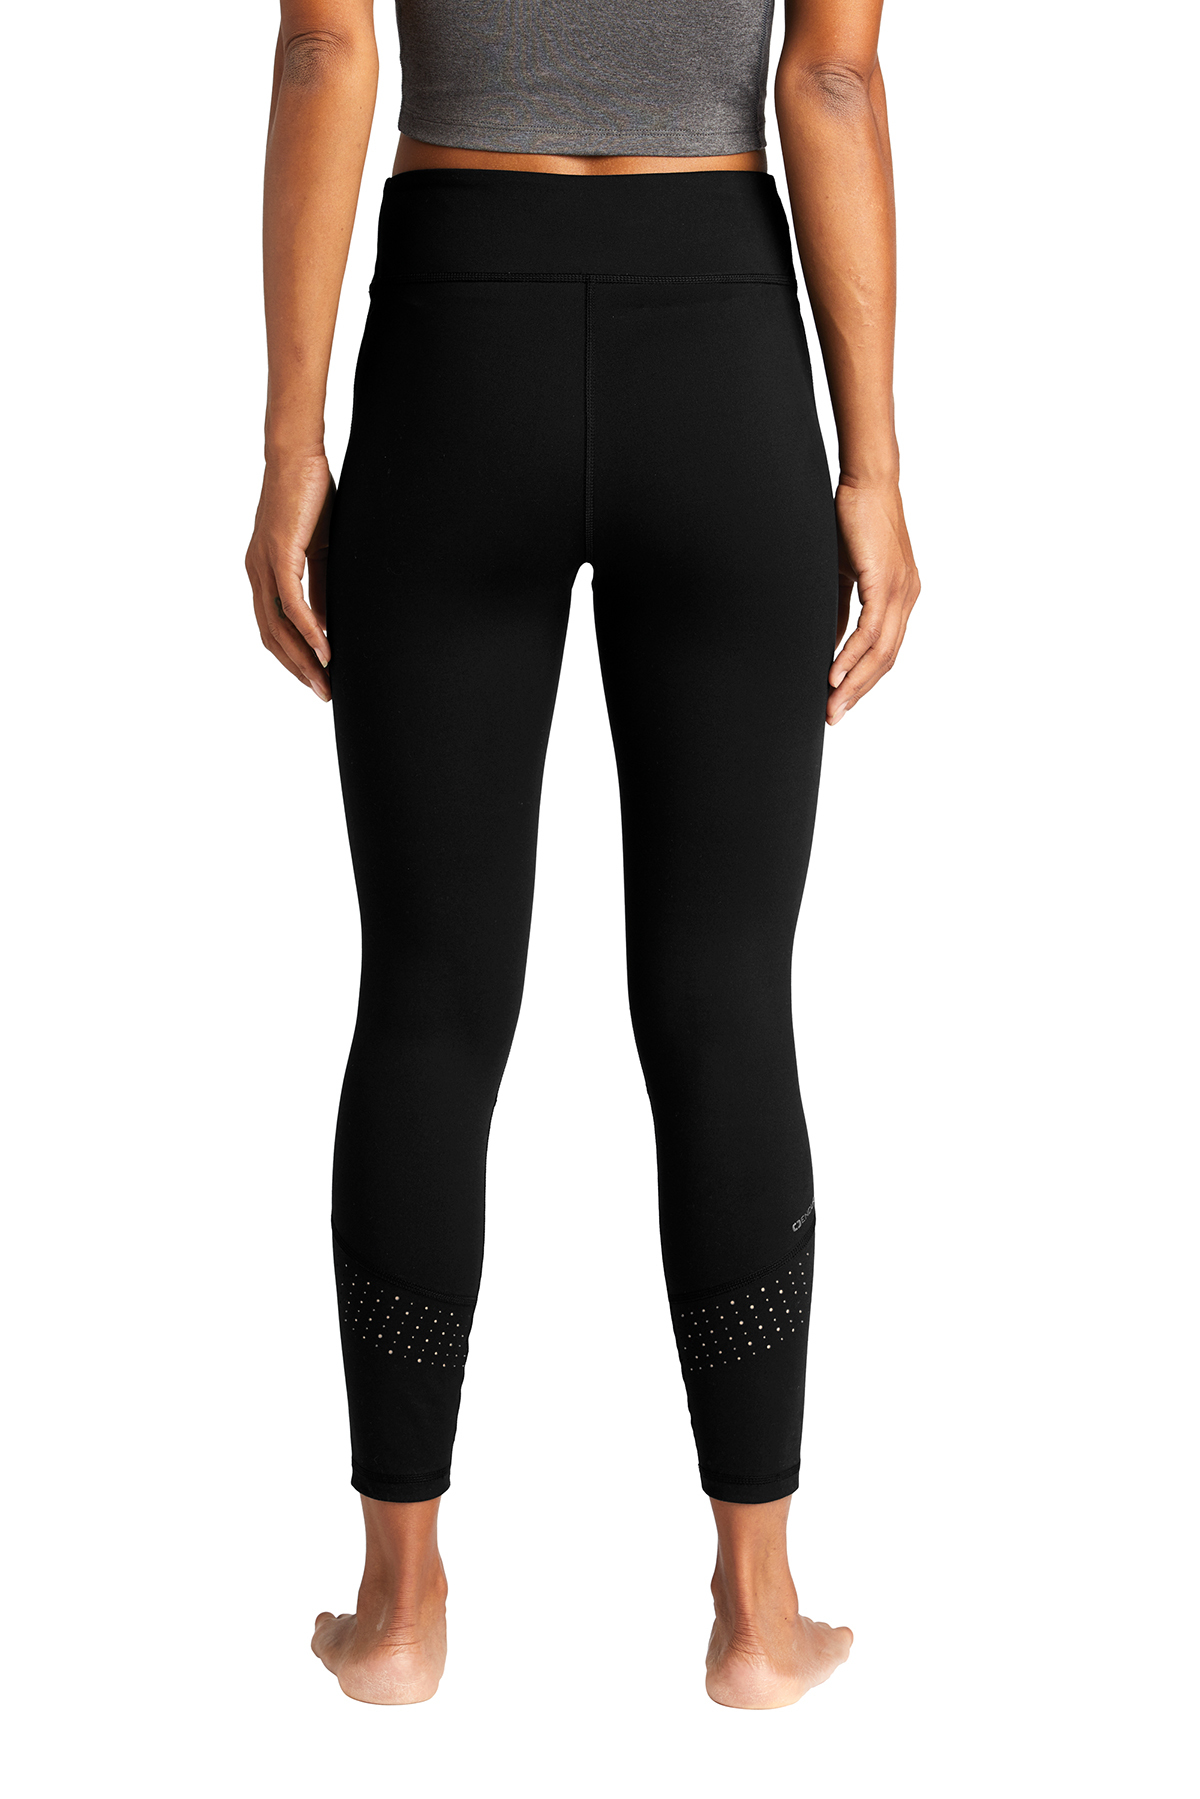 Spaio - SPAIO EXTREME-PRO THERMOACTIVE LEGGINGS (for women) - Online shop